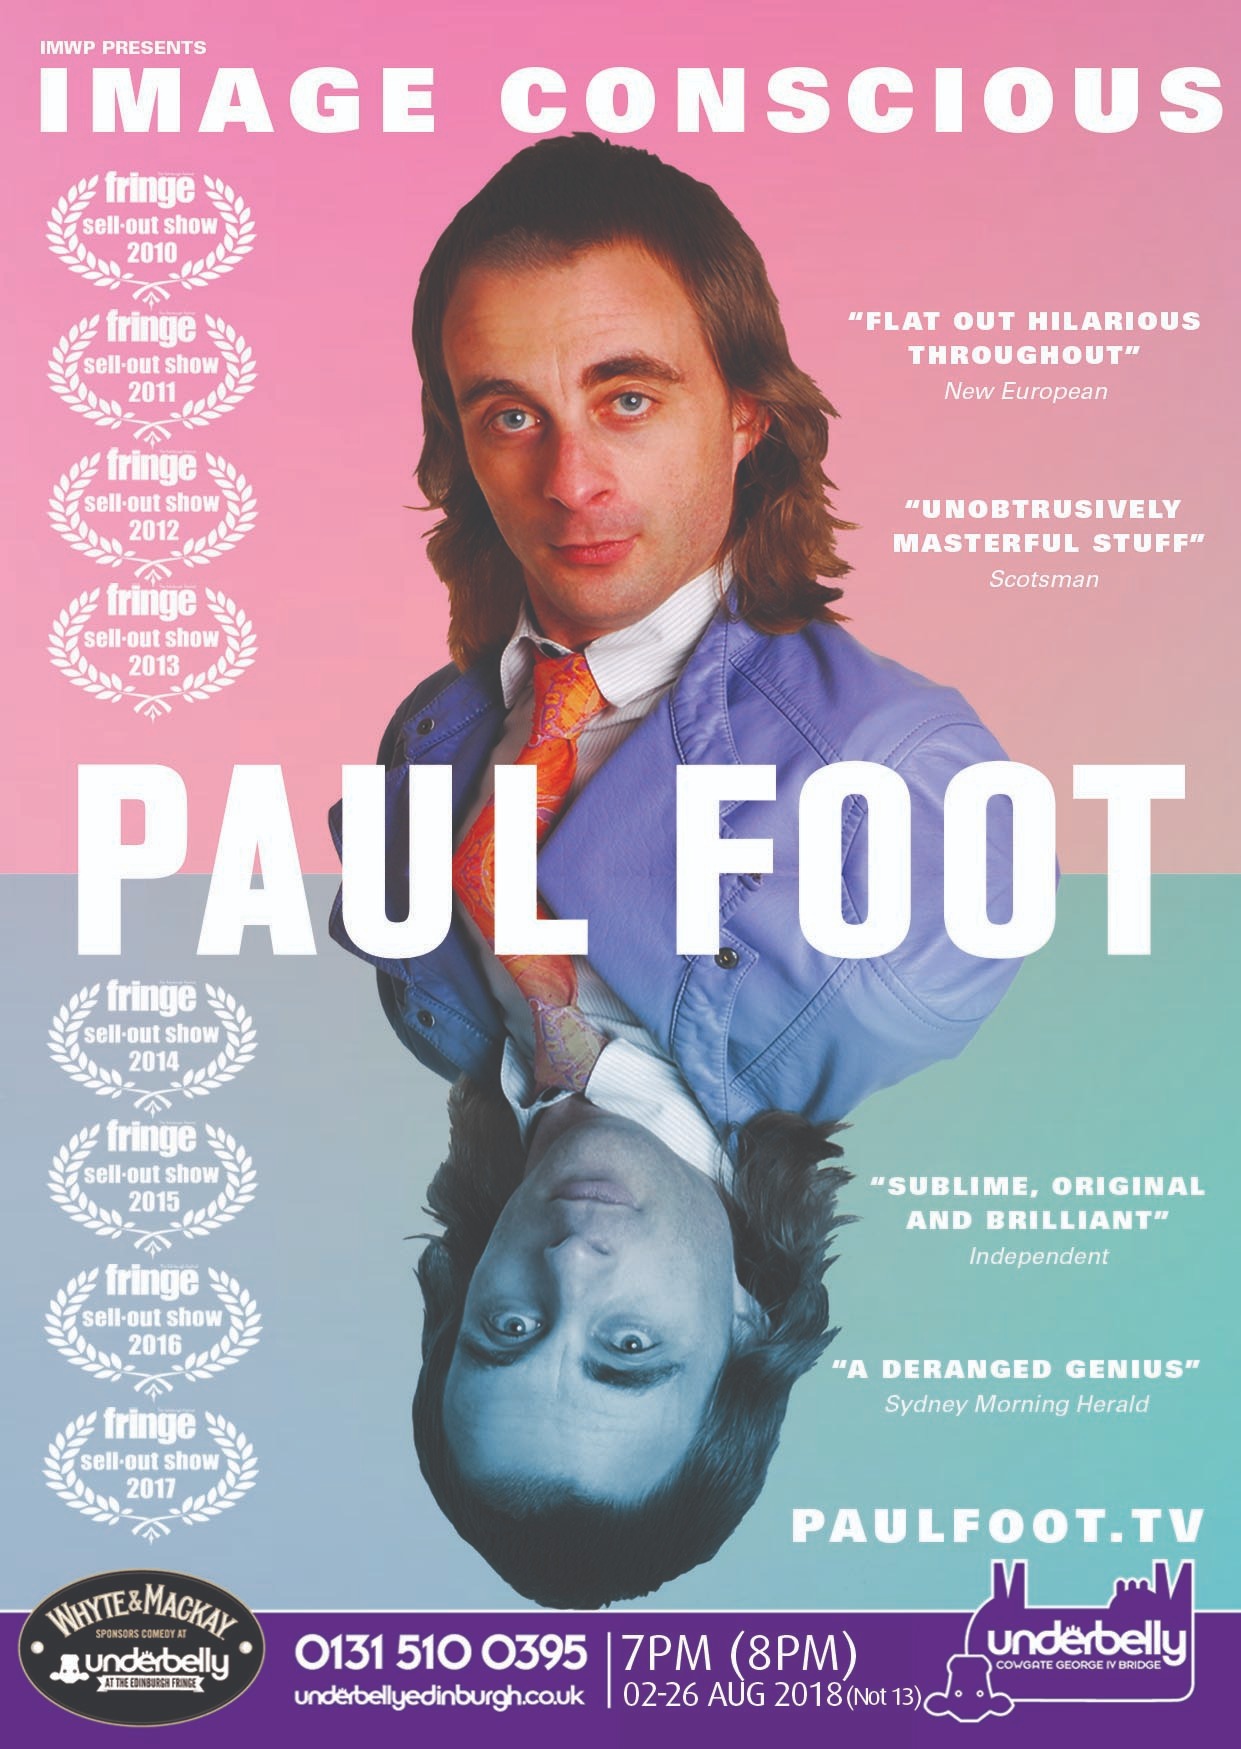 The poster for Paul Foot: Image Conscious